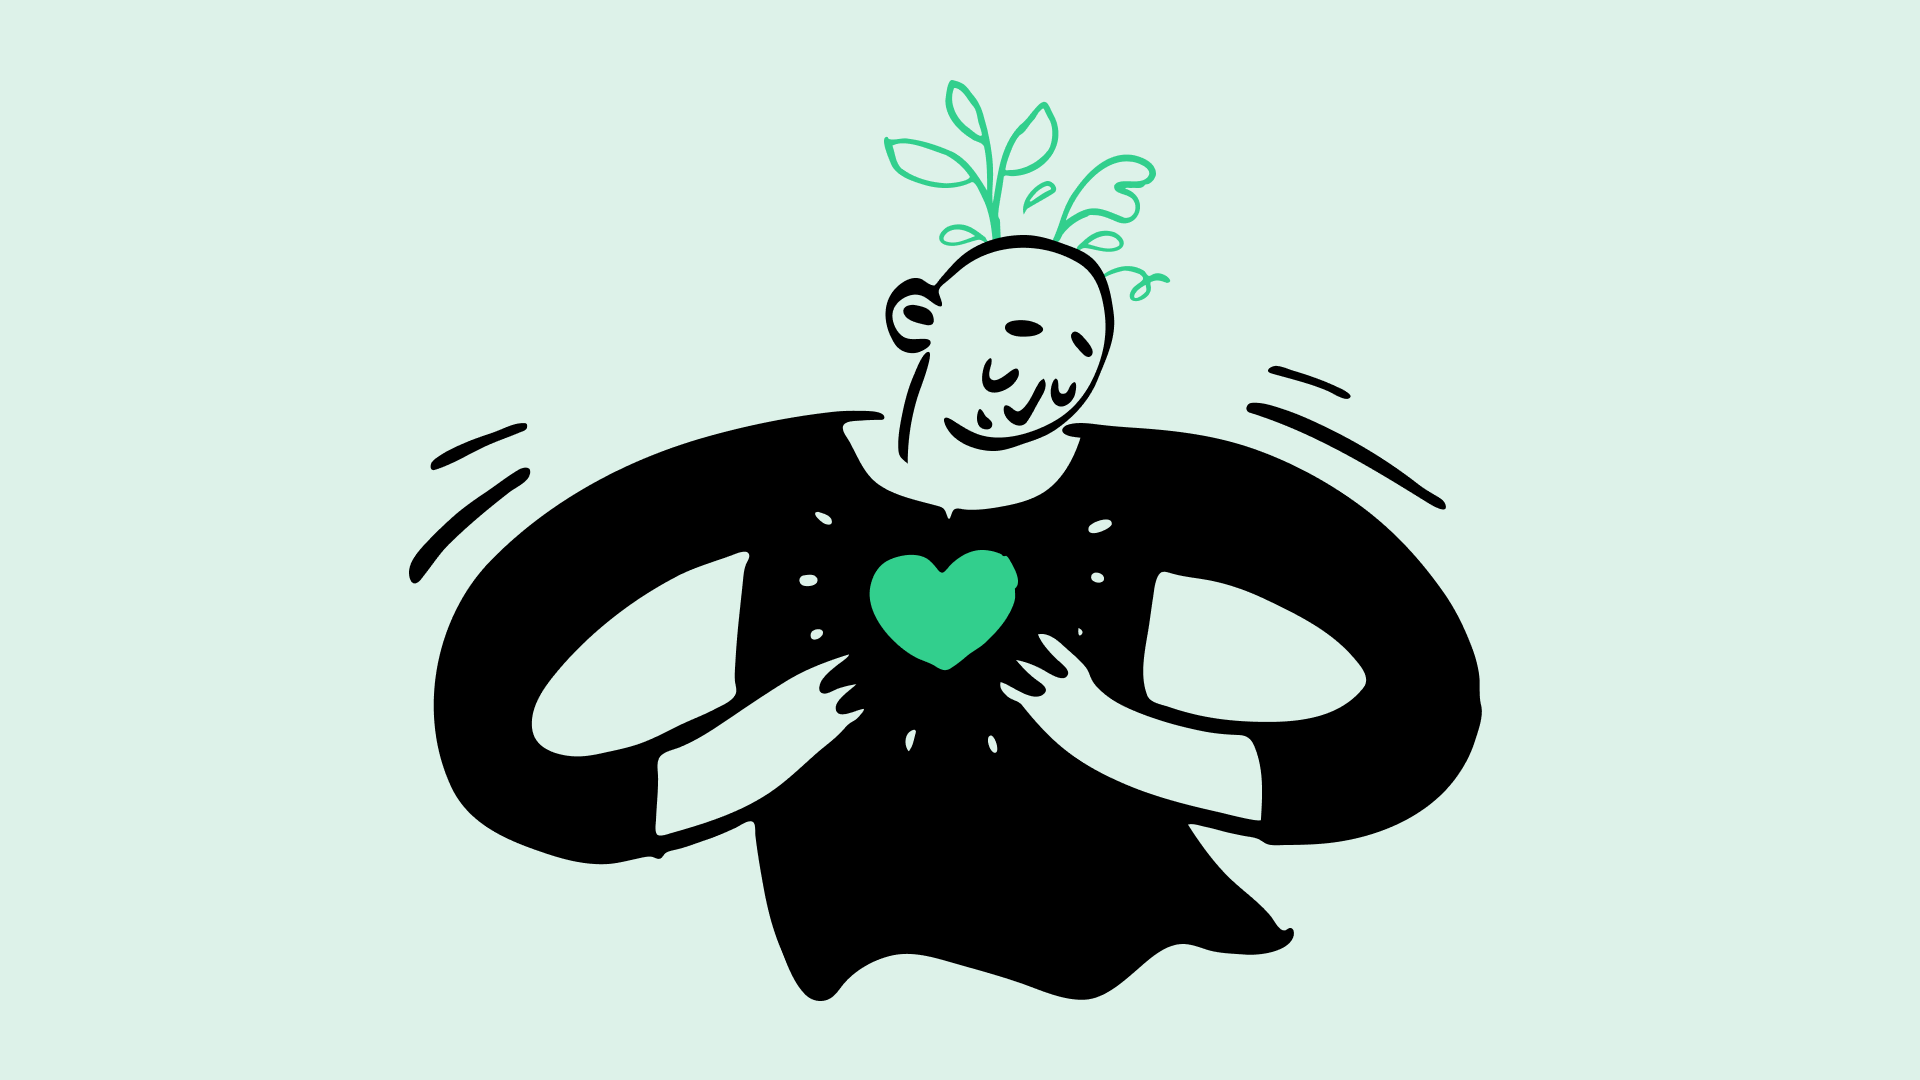 Person with a green heart and plants growing from their head